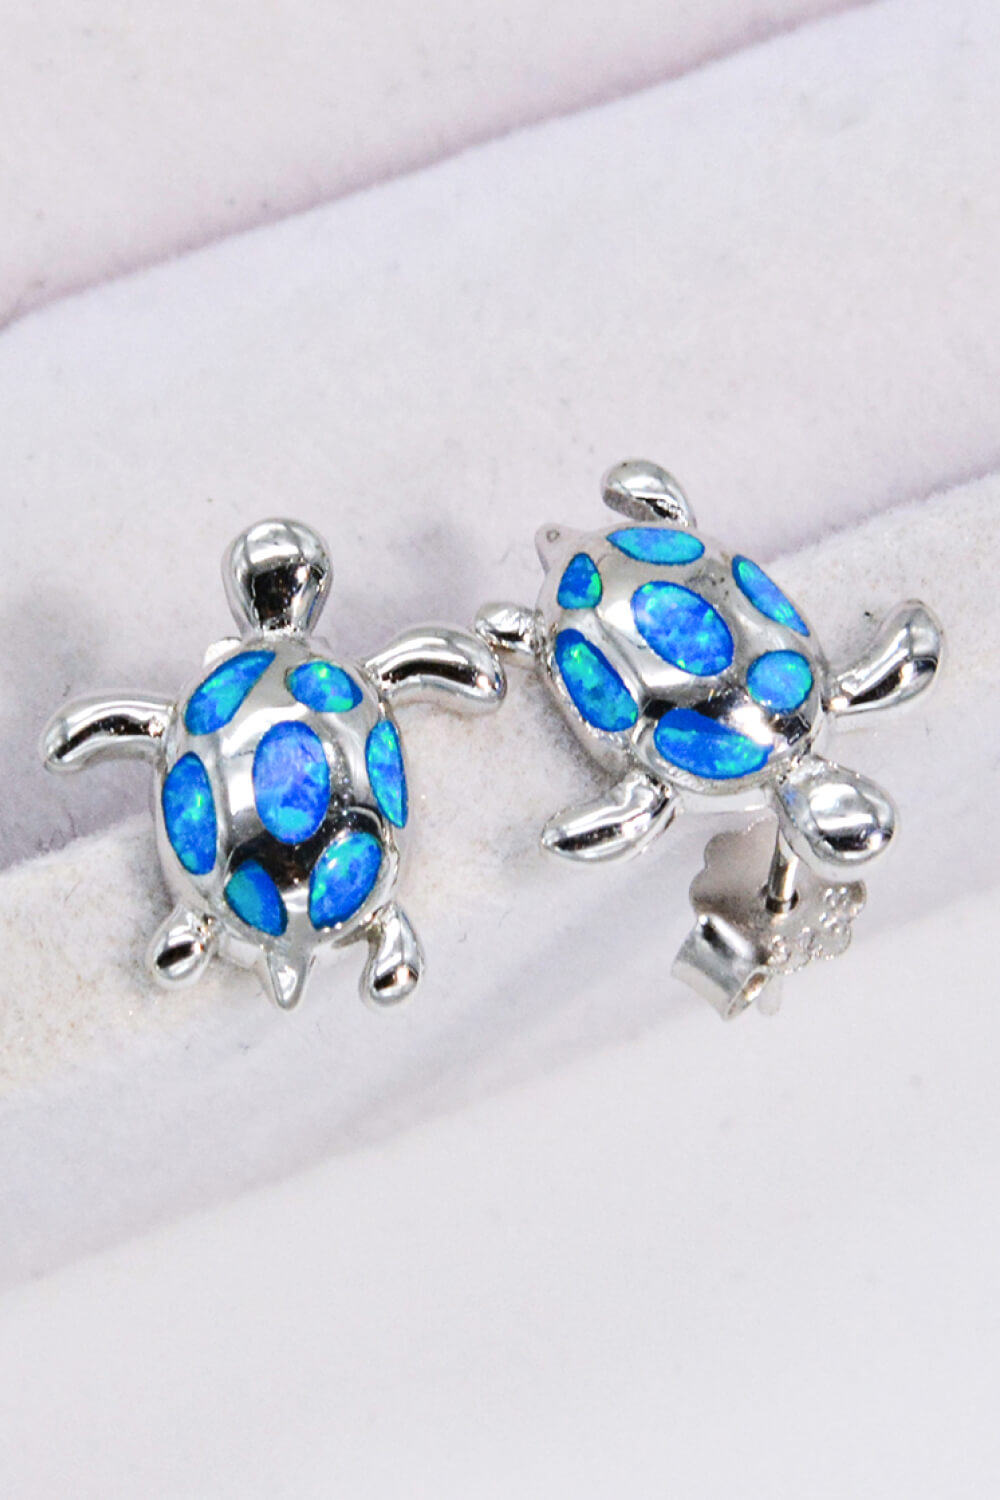 Opal Turtle Platinum-Plated Stud Earrings - Tophatter Shopping Deals - Electronics, Jewelry, Auction, App, Bidding, Gadgets, Fashion